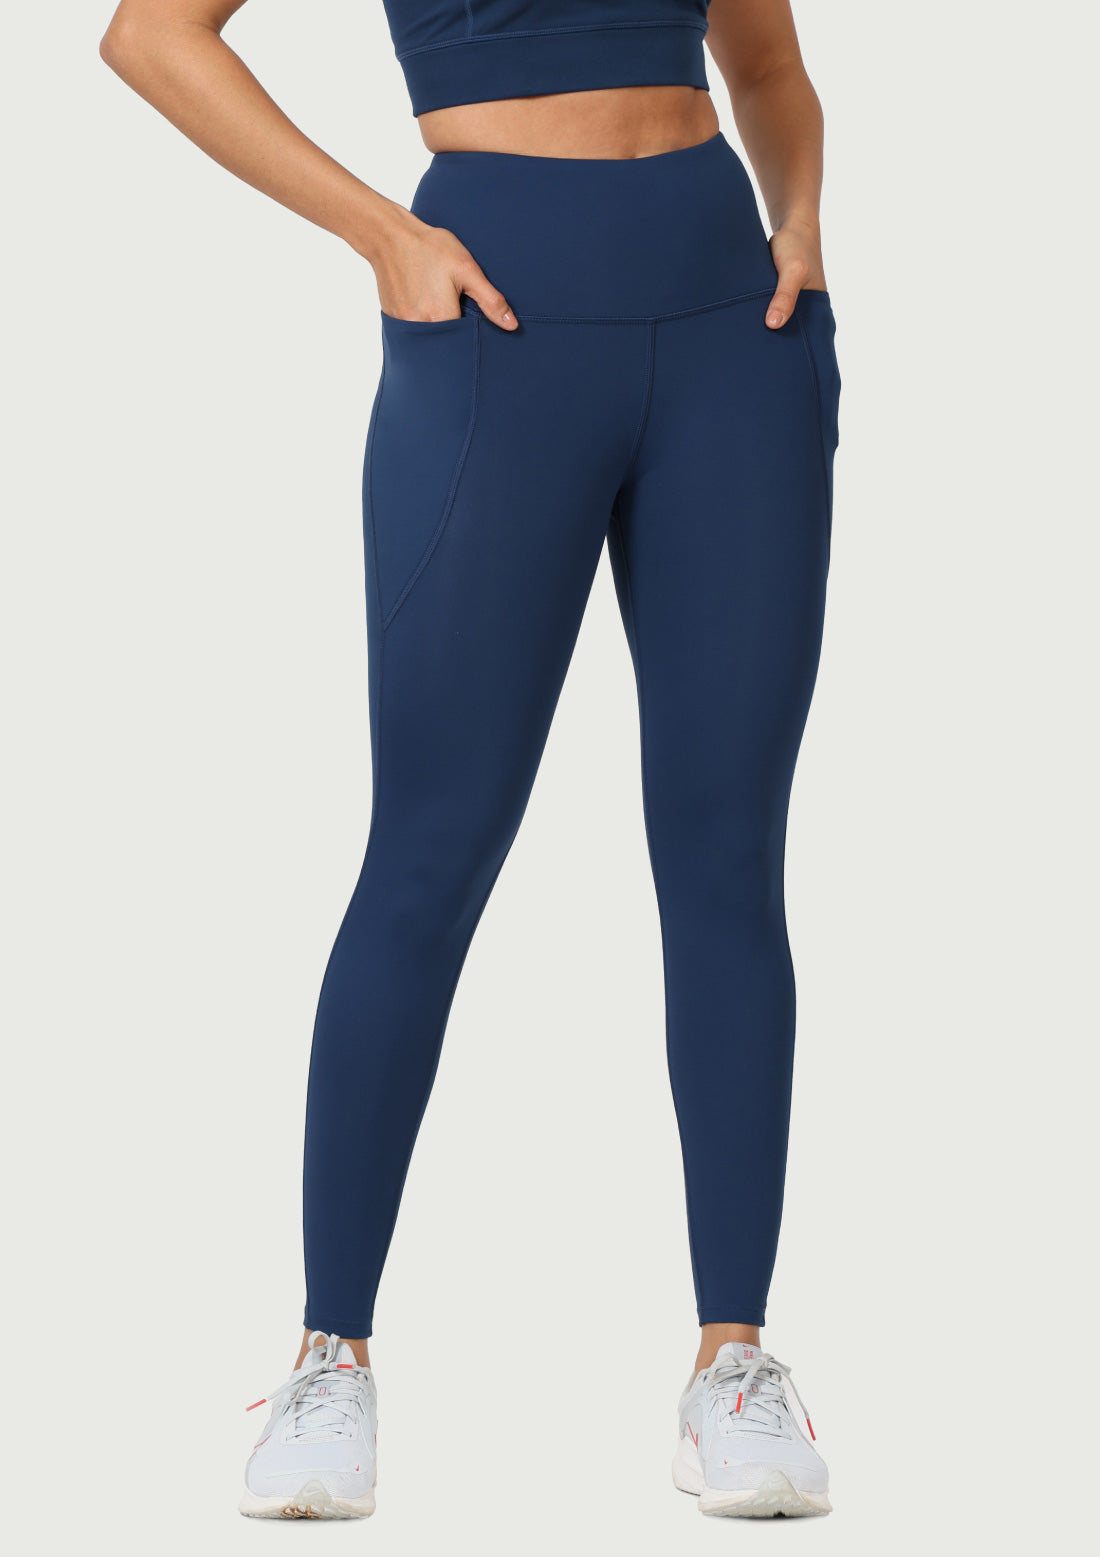 Buy DANCE FREE BLUE YOGA PANTS for Women Online in India